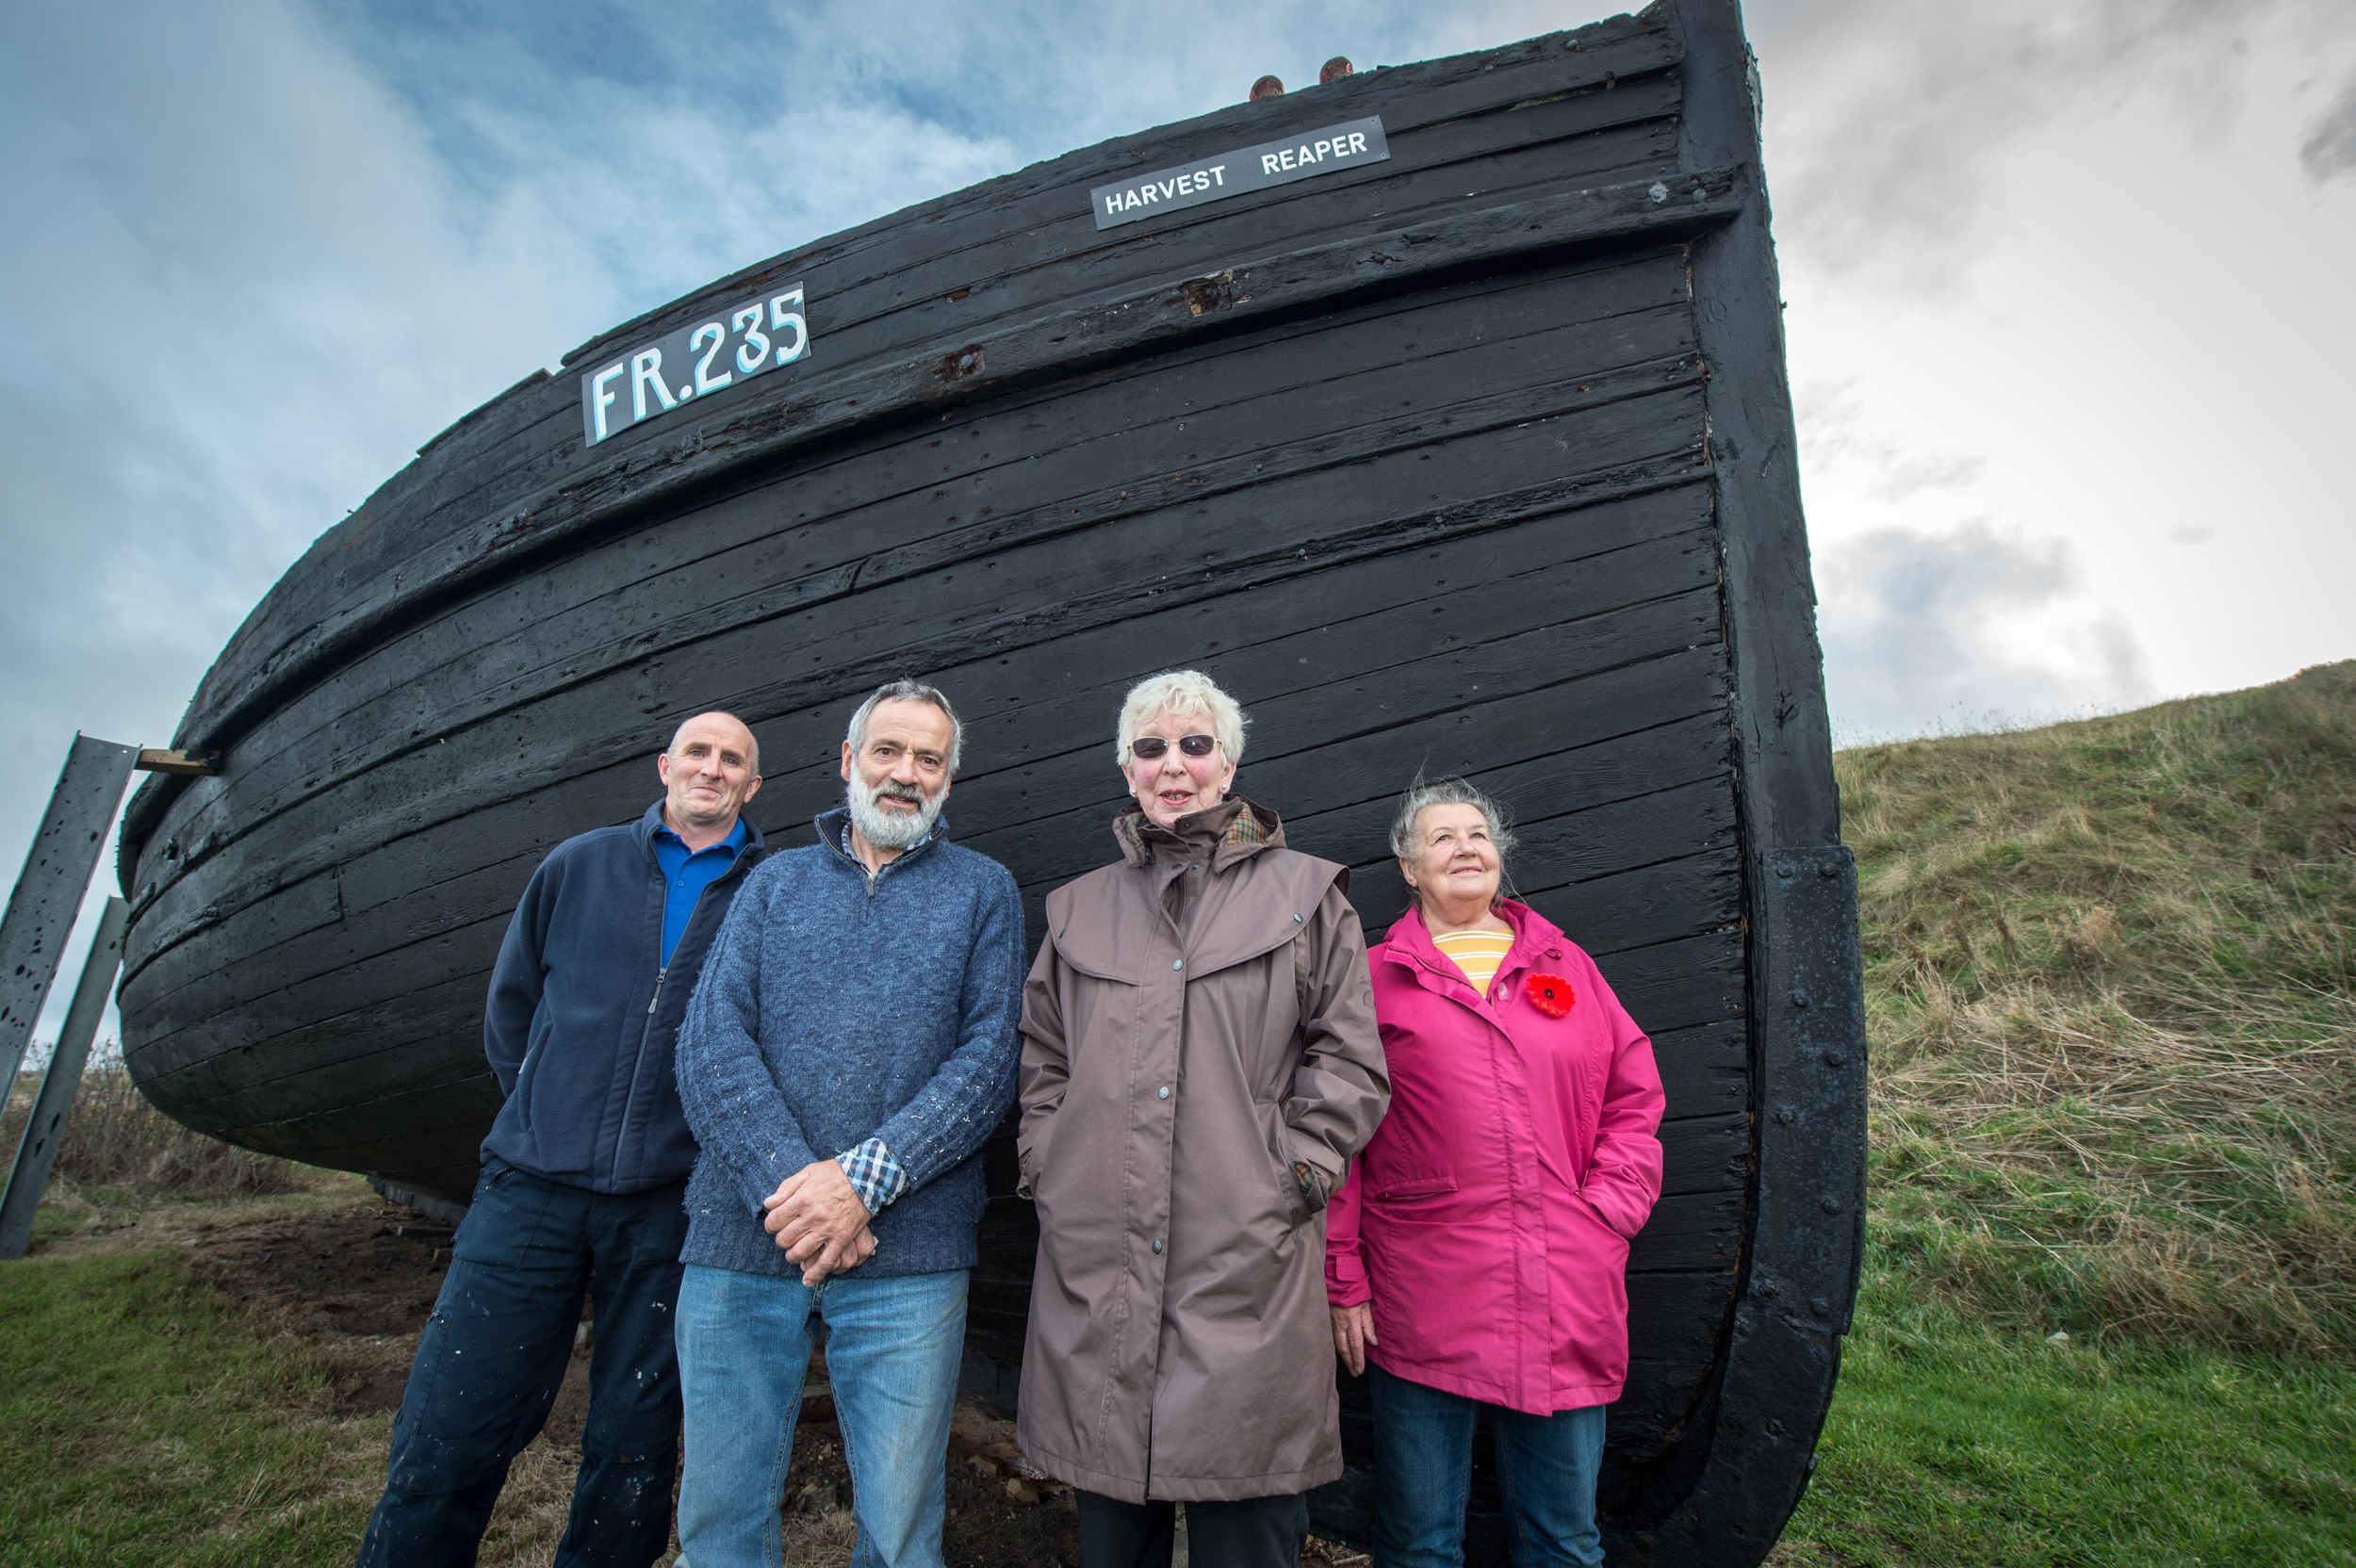 The newly-restored Harvest Reaper fishing vessel in Burghead with (L-R) - Peter Wilson (Senior Supervisor for Criminal Justice) Dan Ralph (Burghead Headland Trustee) Cath Miller (Secretary of Burghead Headland trust) and Hiliary Gloyer (Chair of Headland site)

Picture by Jason Hedges